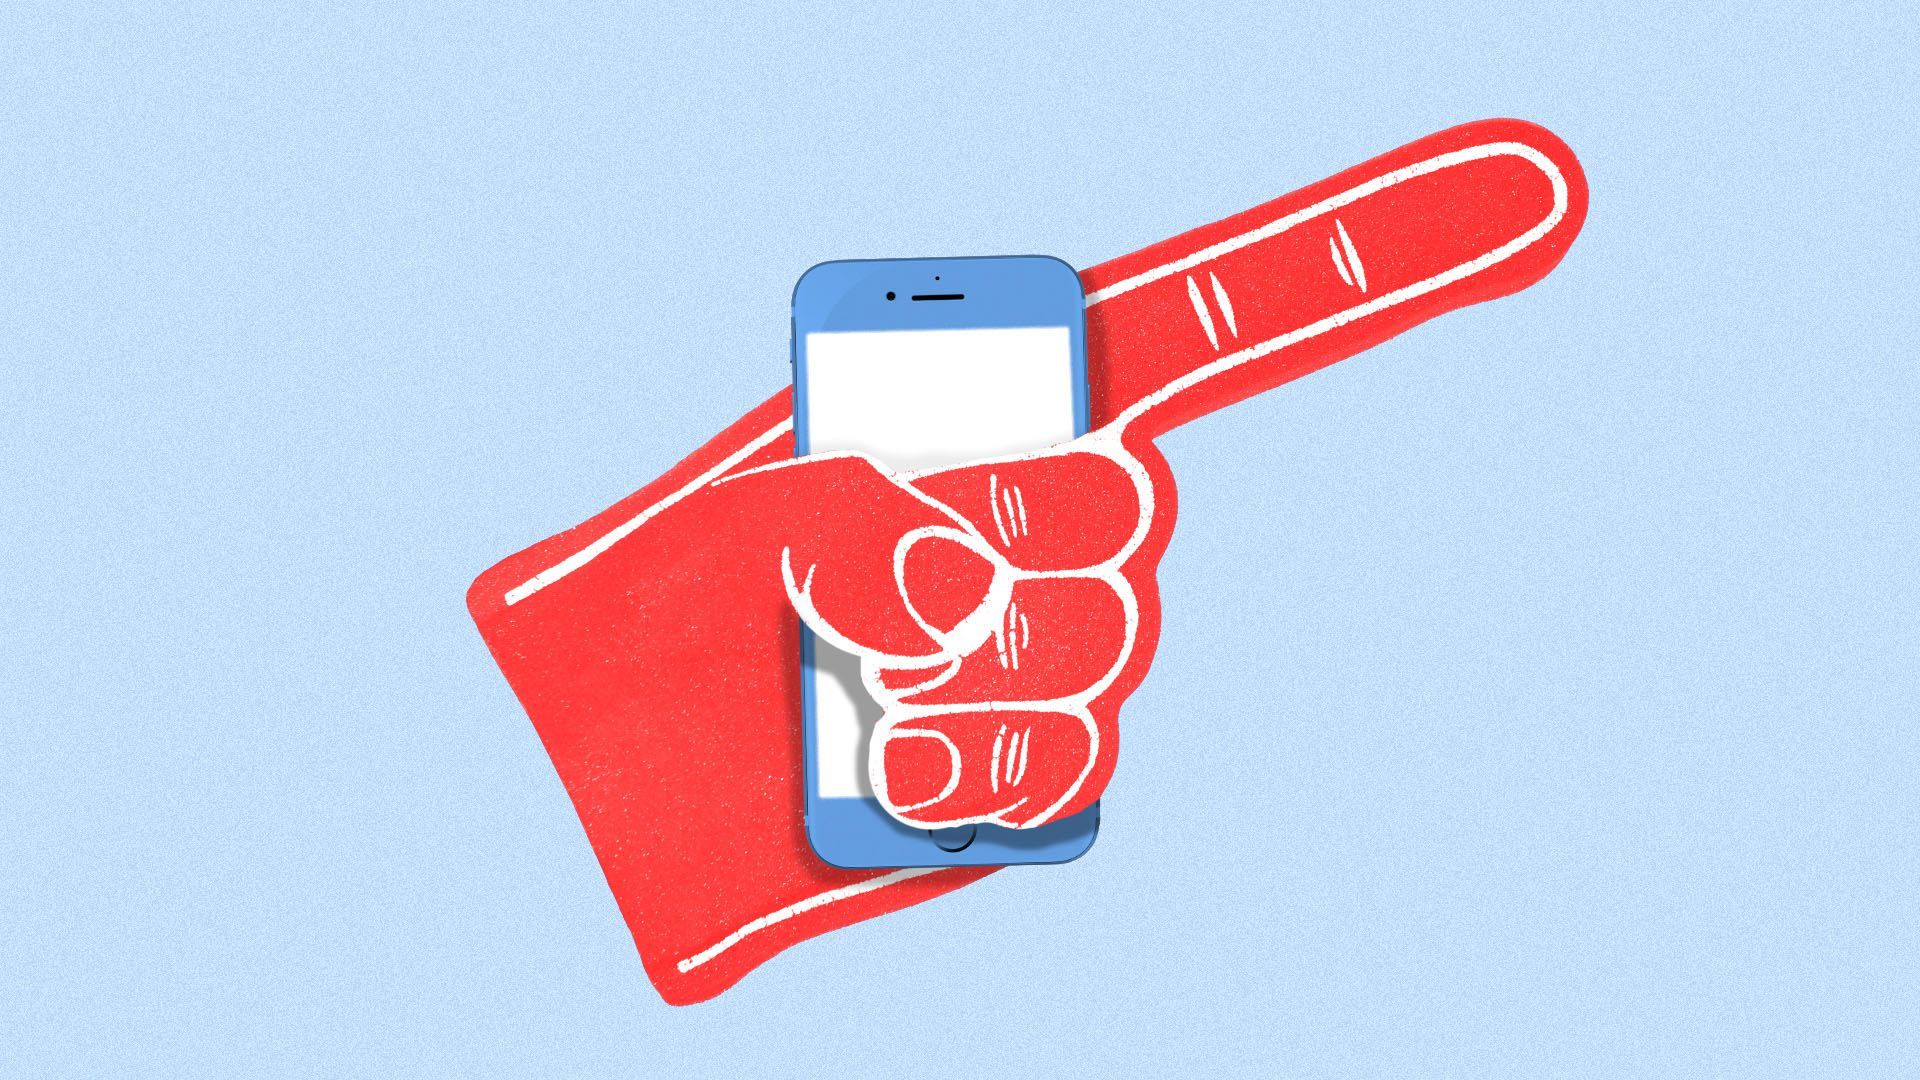 Illustration of a giant foam finger holding a phone